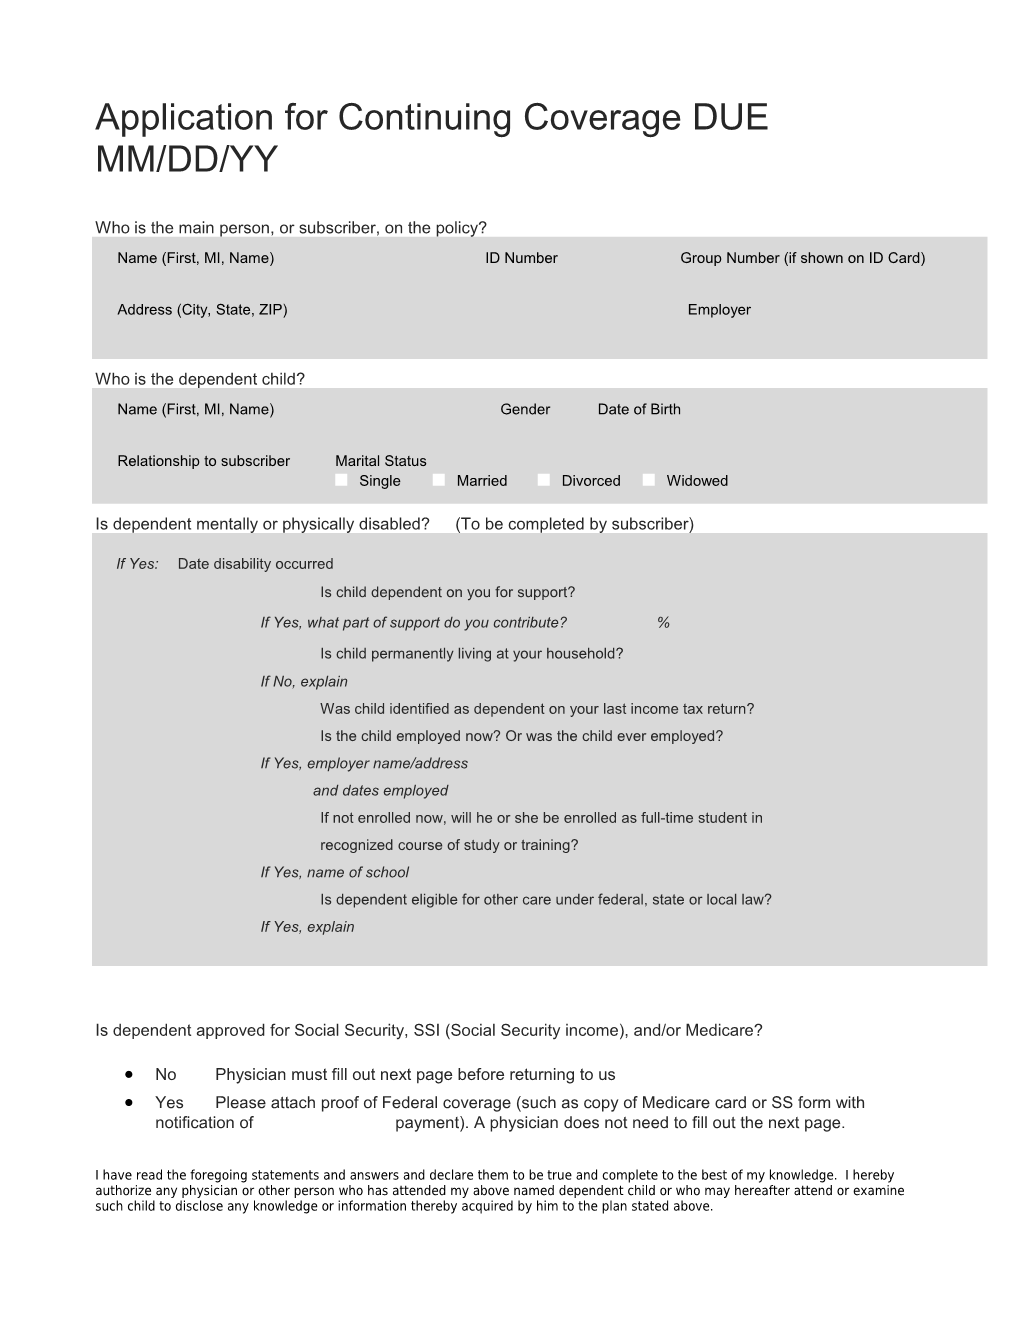 Application for Continuing Coverage DUE MM/DD/YY